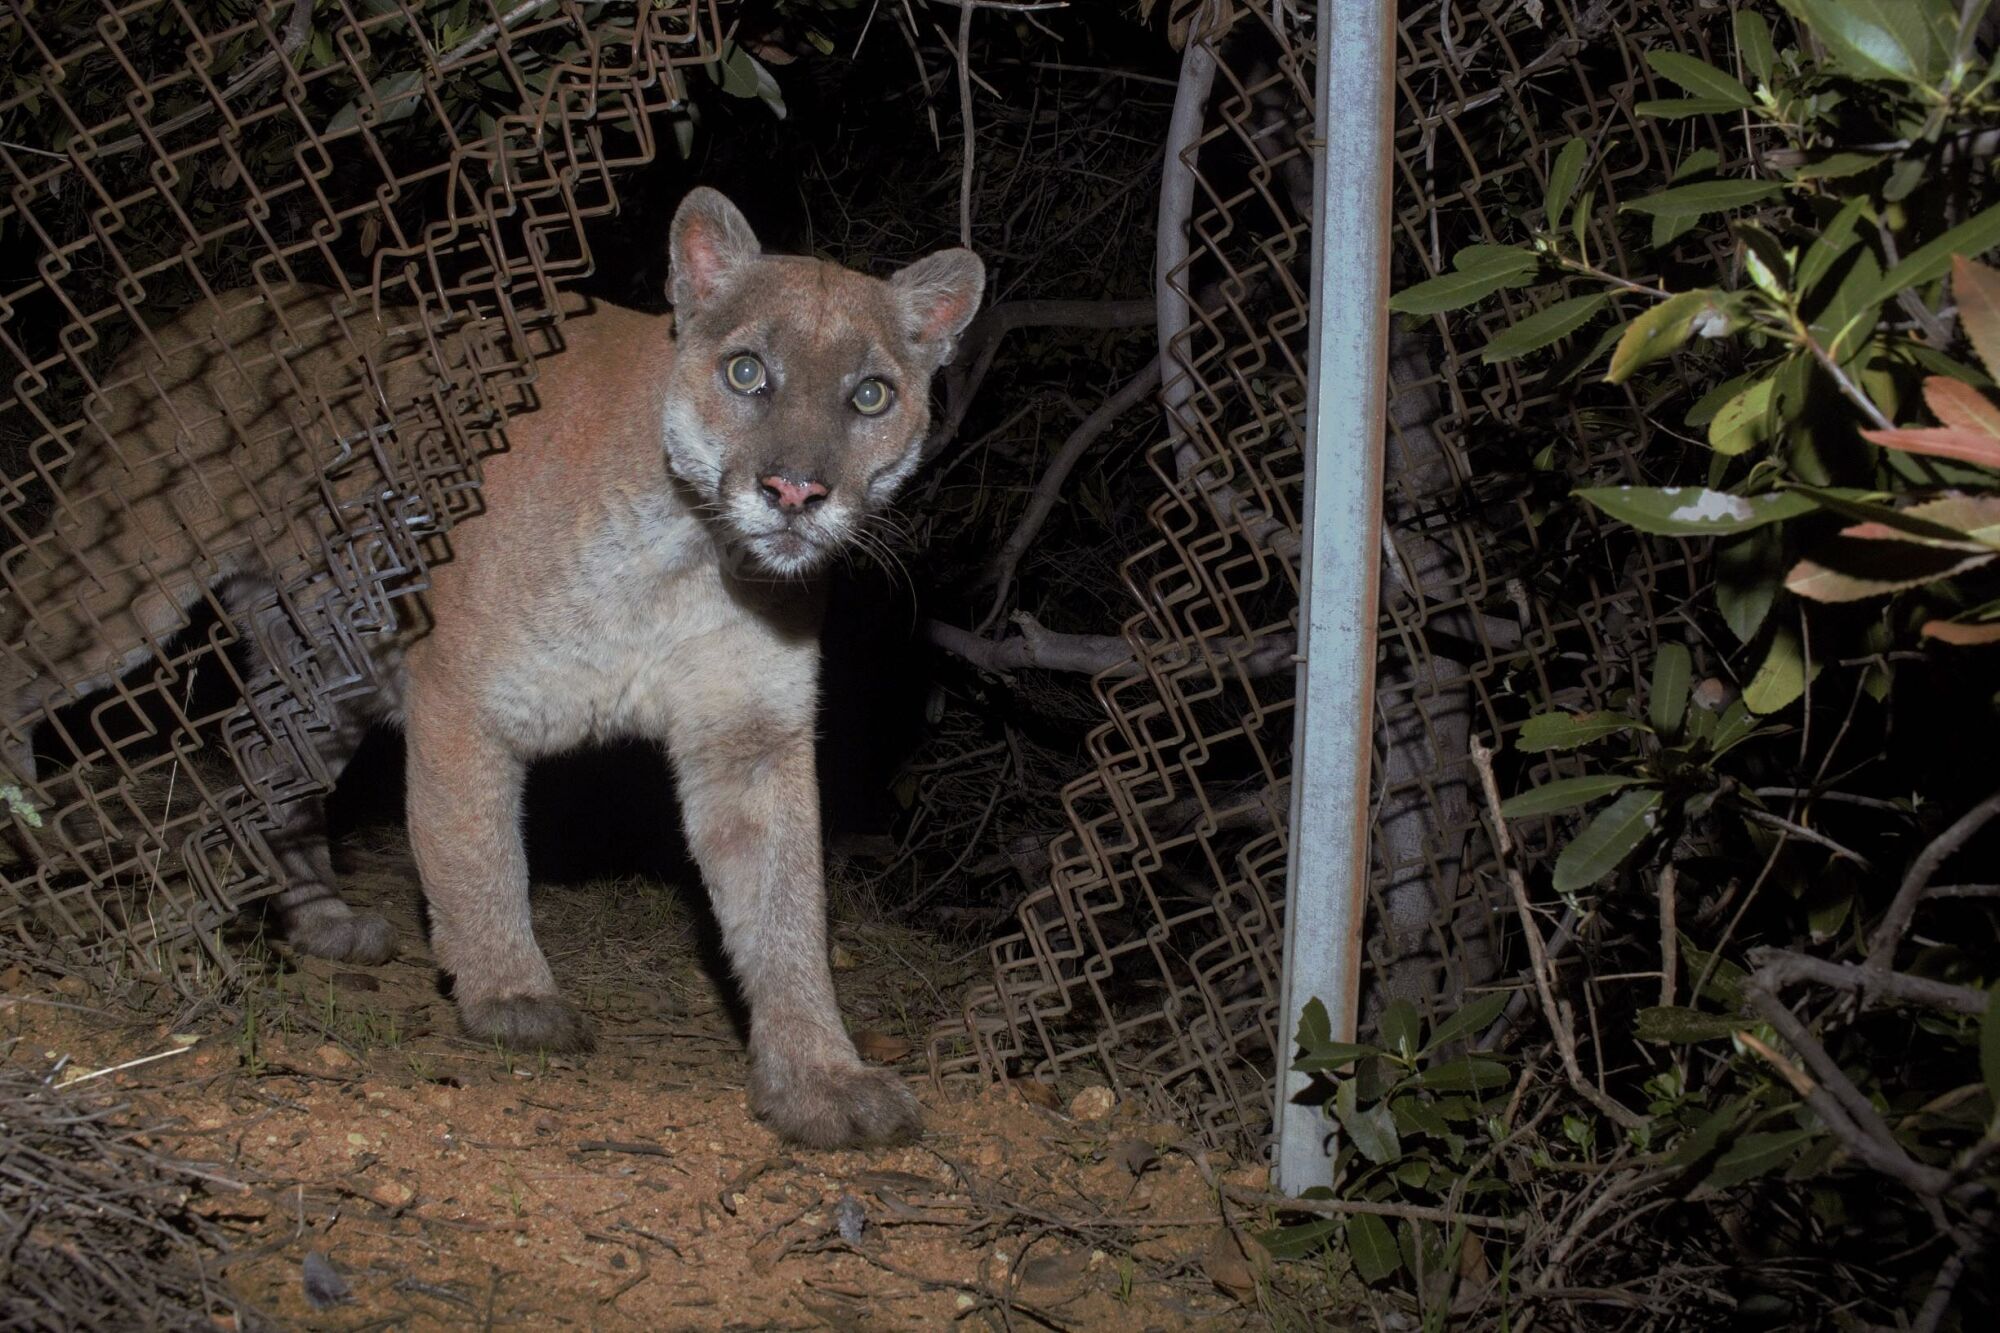 P-22 walks through a break in a chain link fence at night.